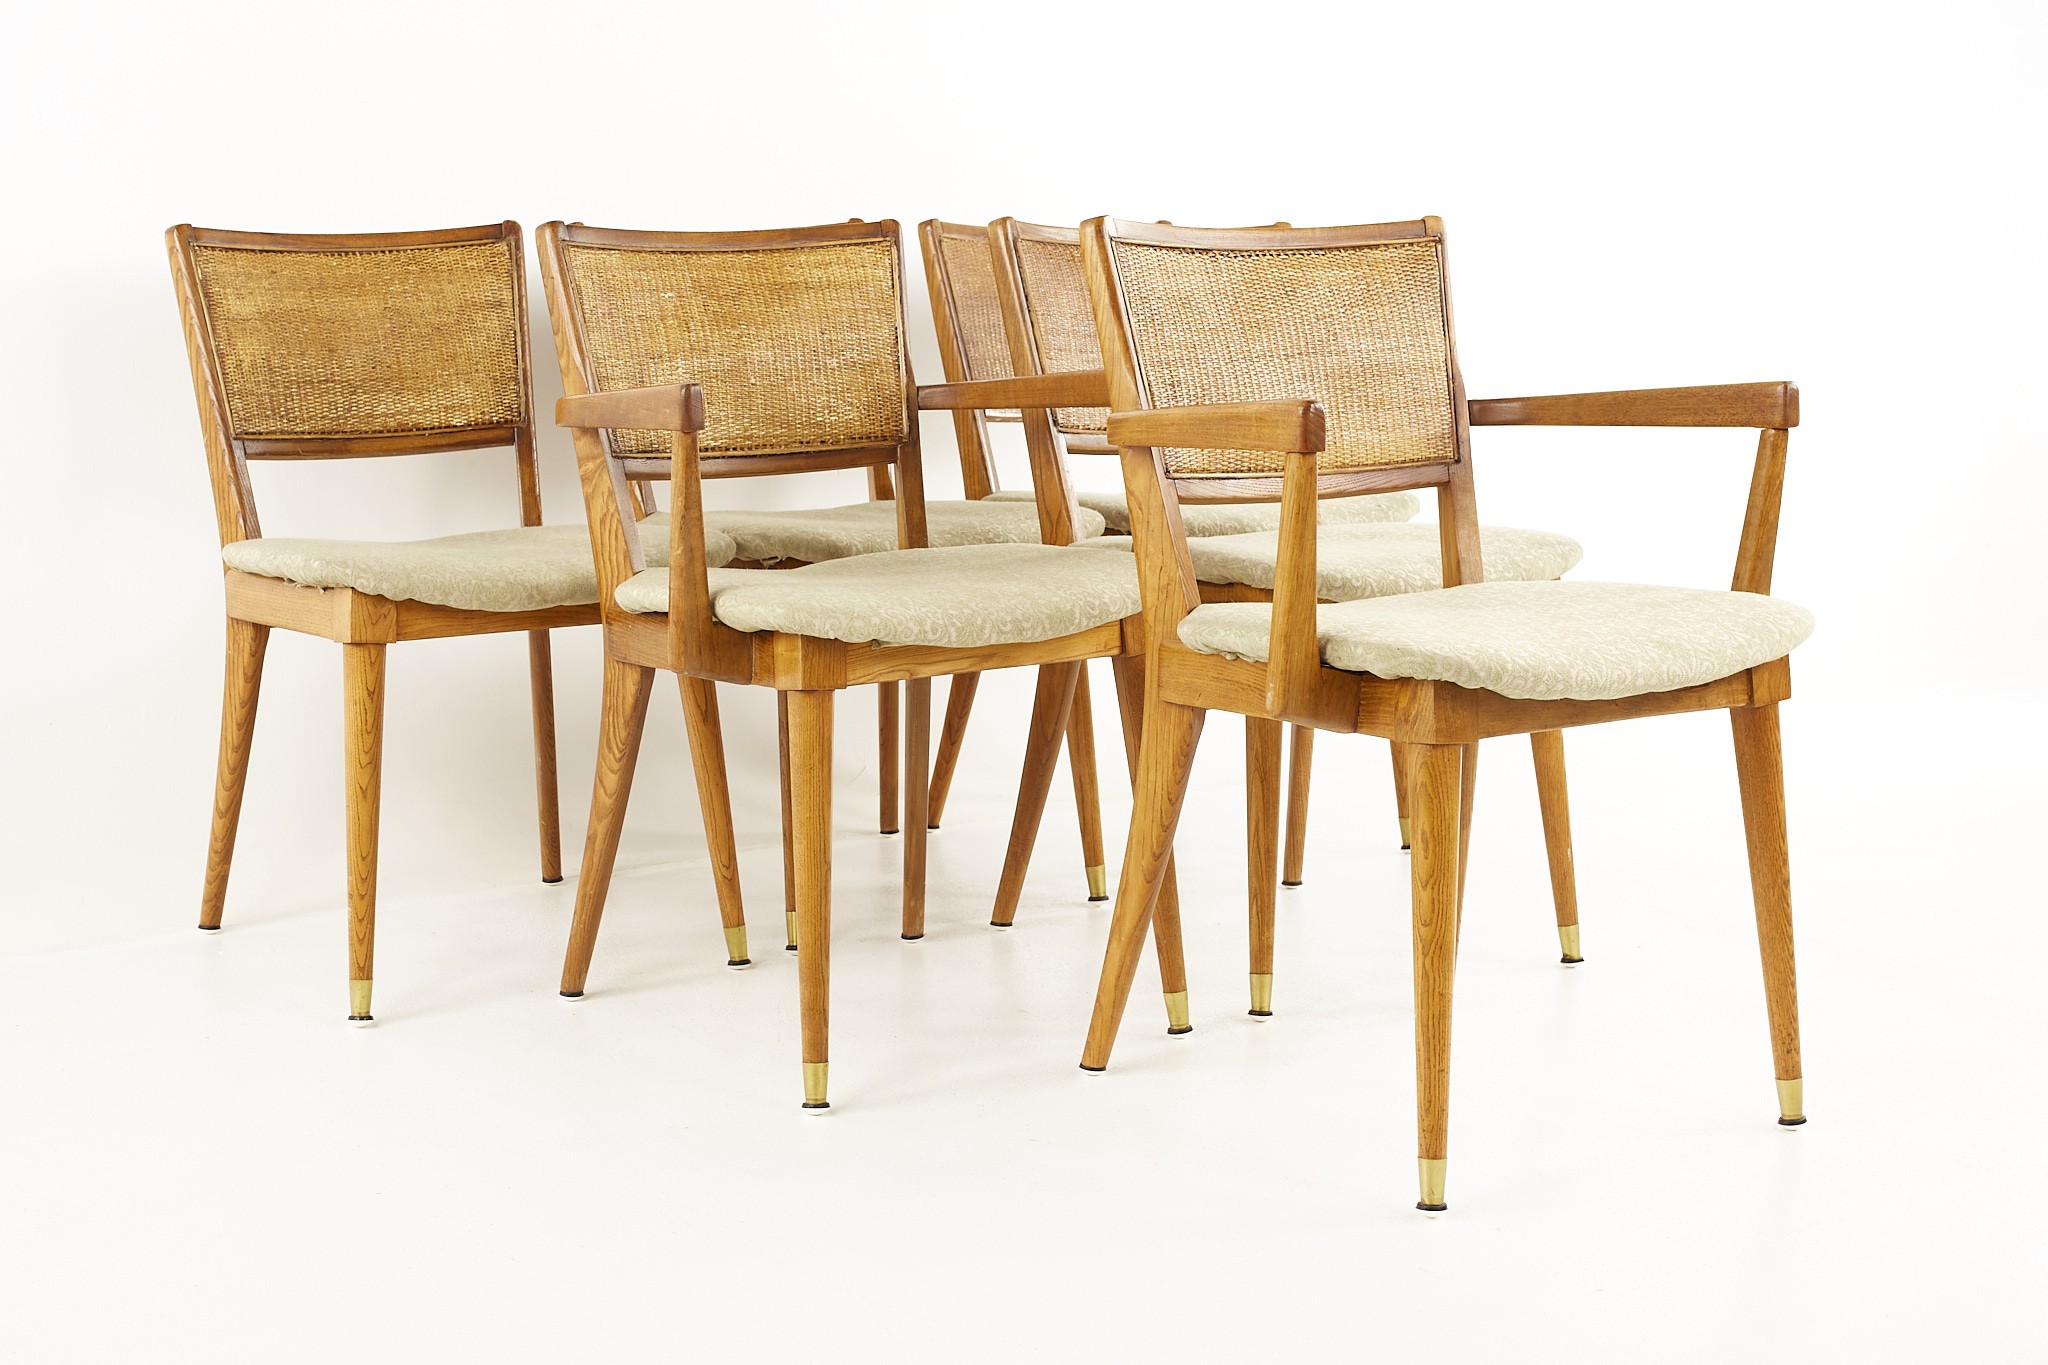 Greta Grossman for Glen of California Mid Century Caned Dining Chairs - Set of 6